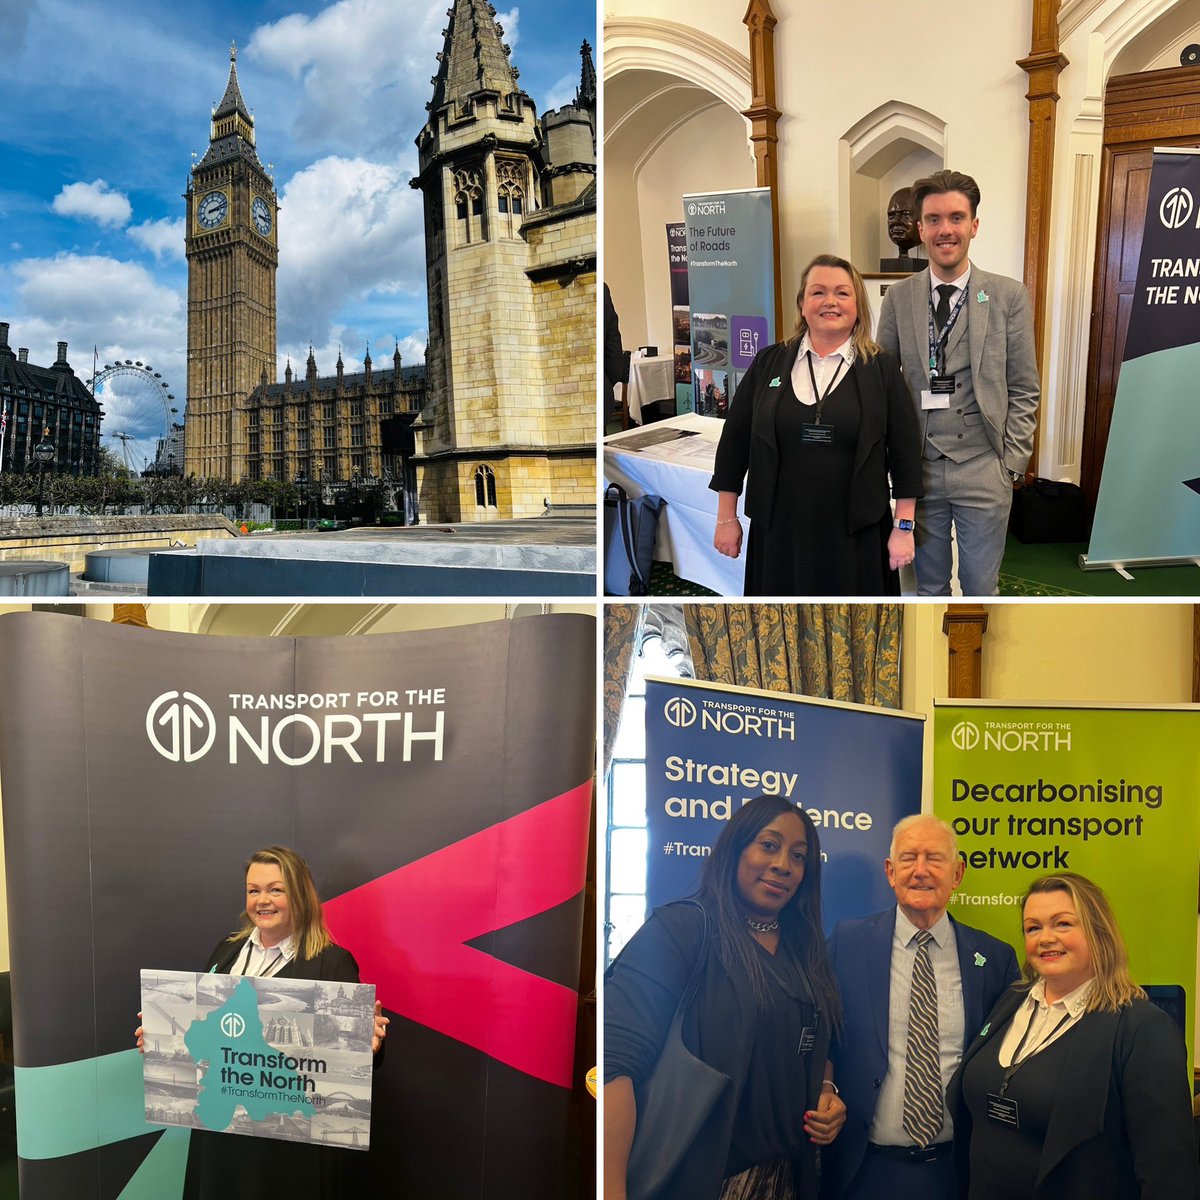 This time last week & the fantastic @Transport4North event at Westminster Palace. Mixing with transport leaders & MP’s there was a genuine sense of optimism about unlocking the economic potential of the North and a shared belief that transport was absolutely key. #BusUsersUk